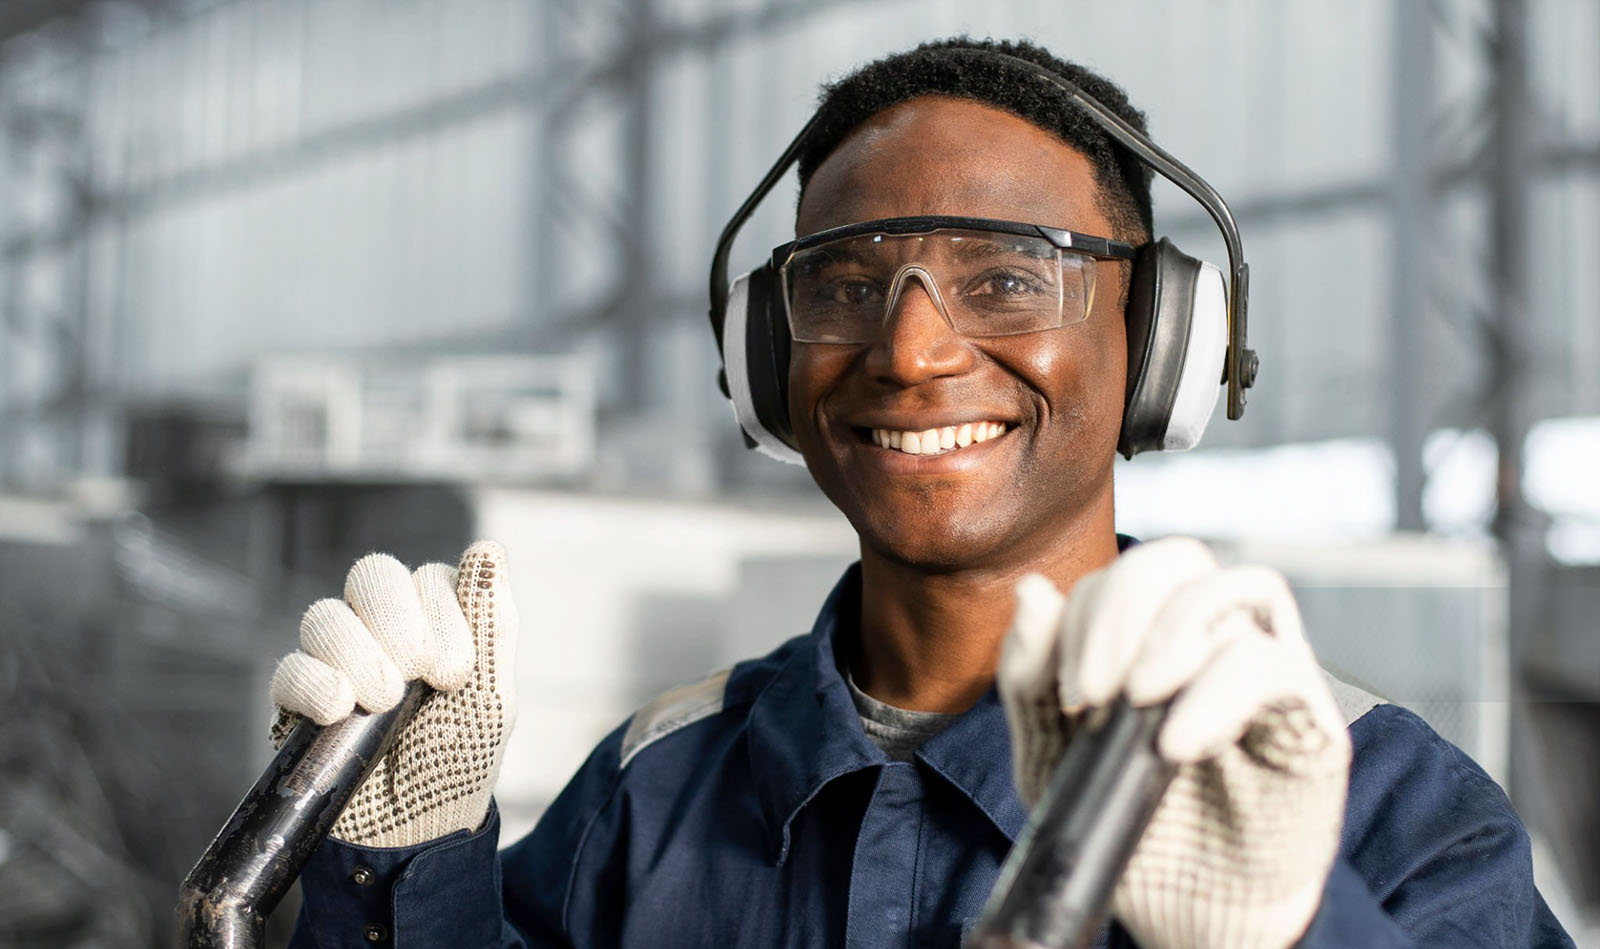 Image of worker smiling